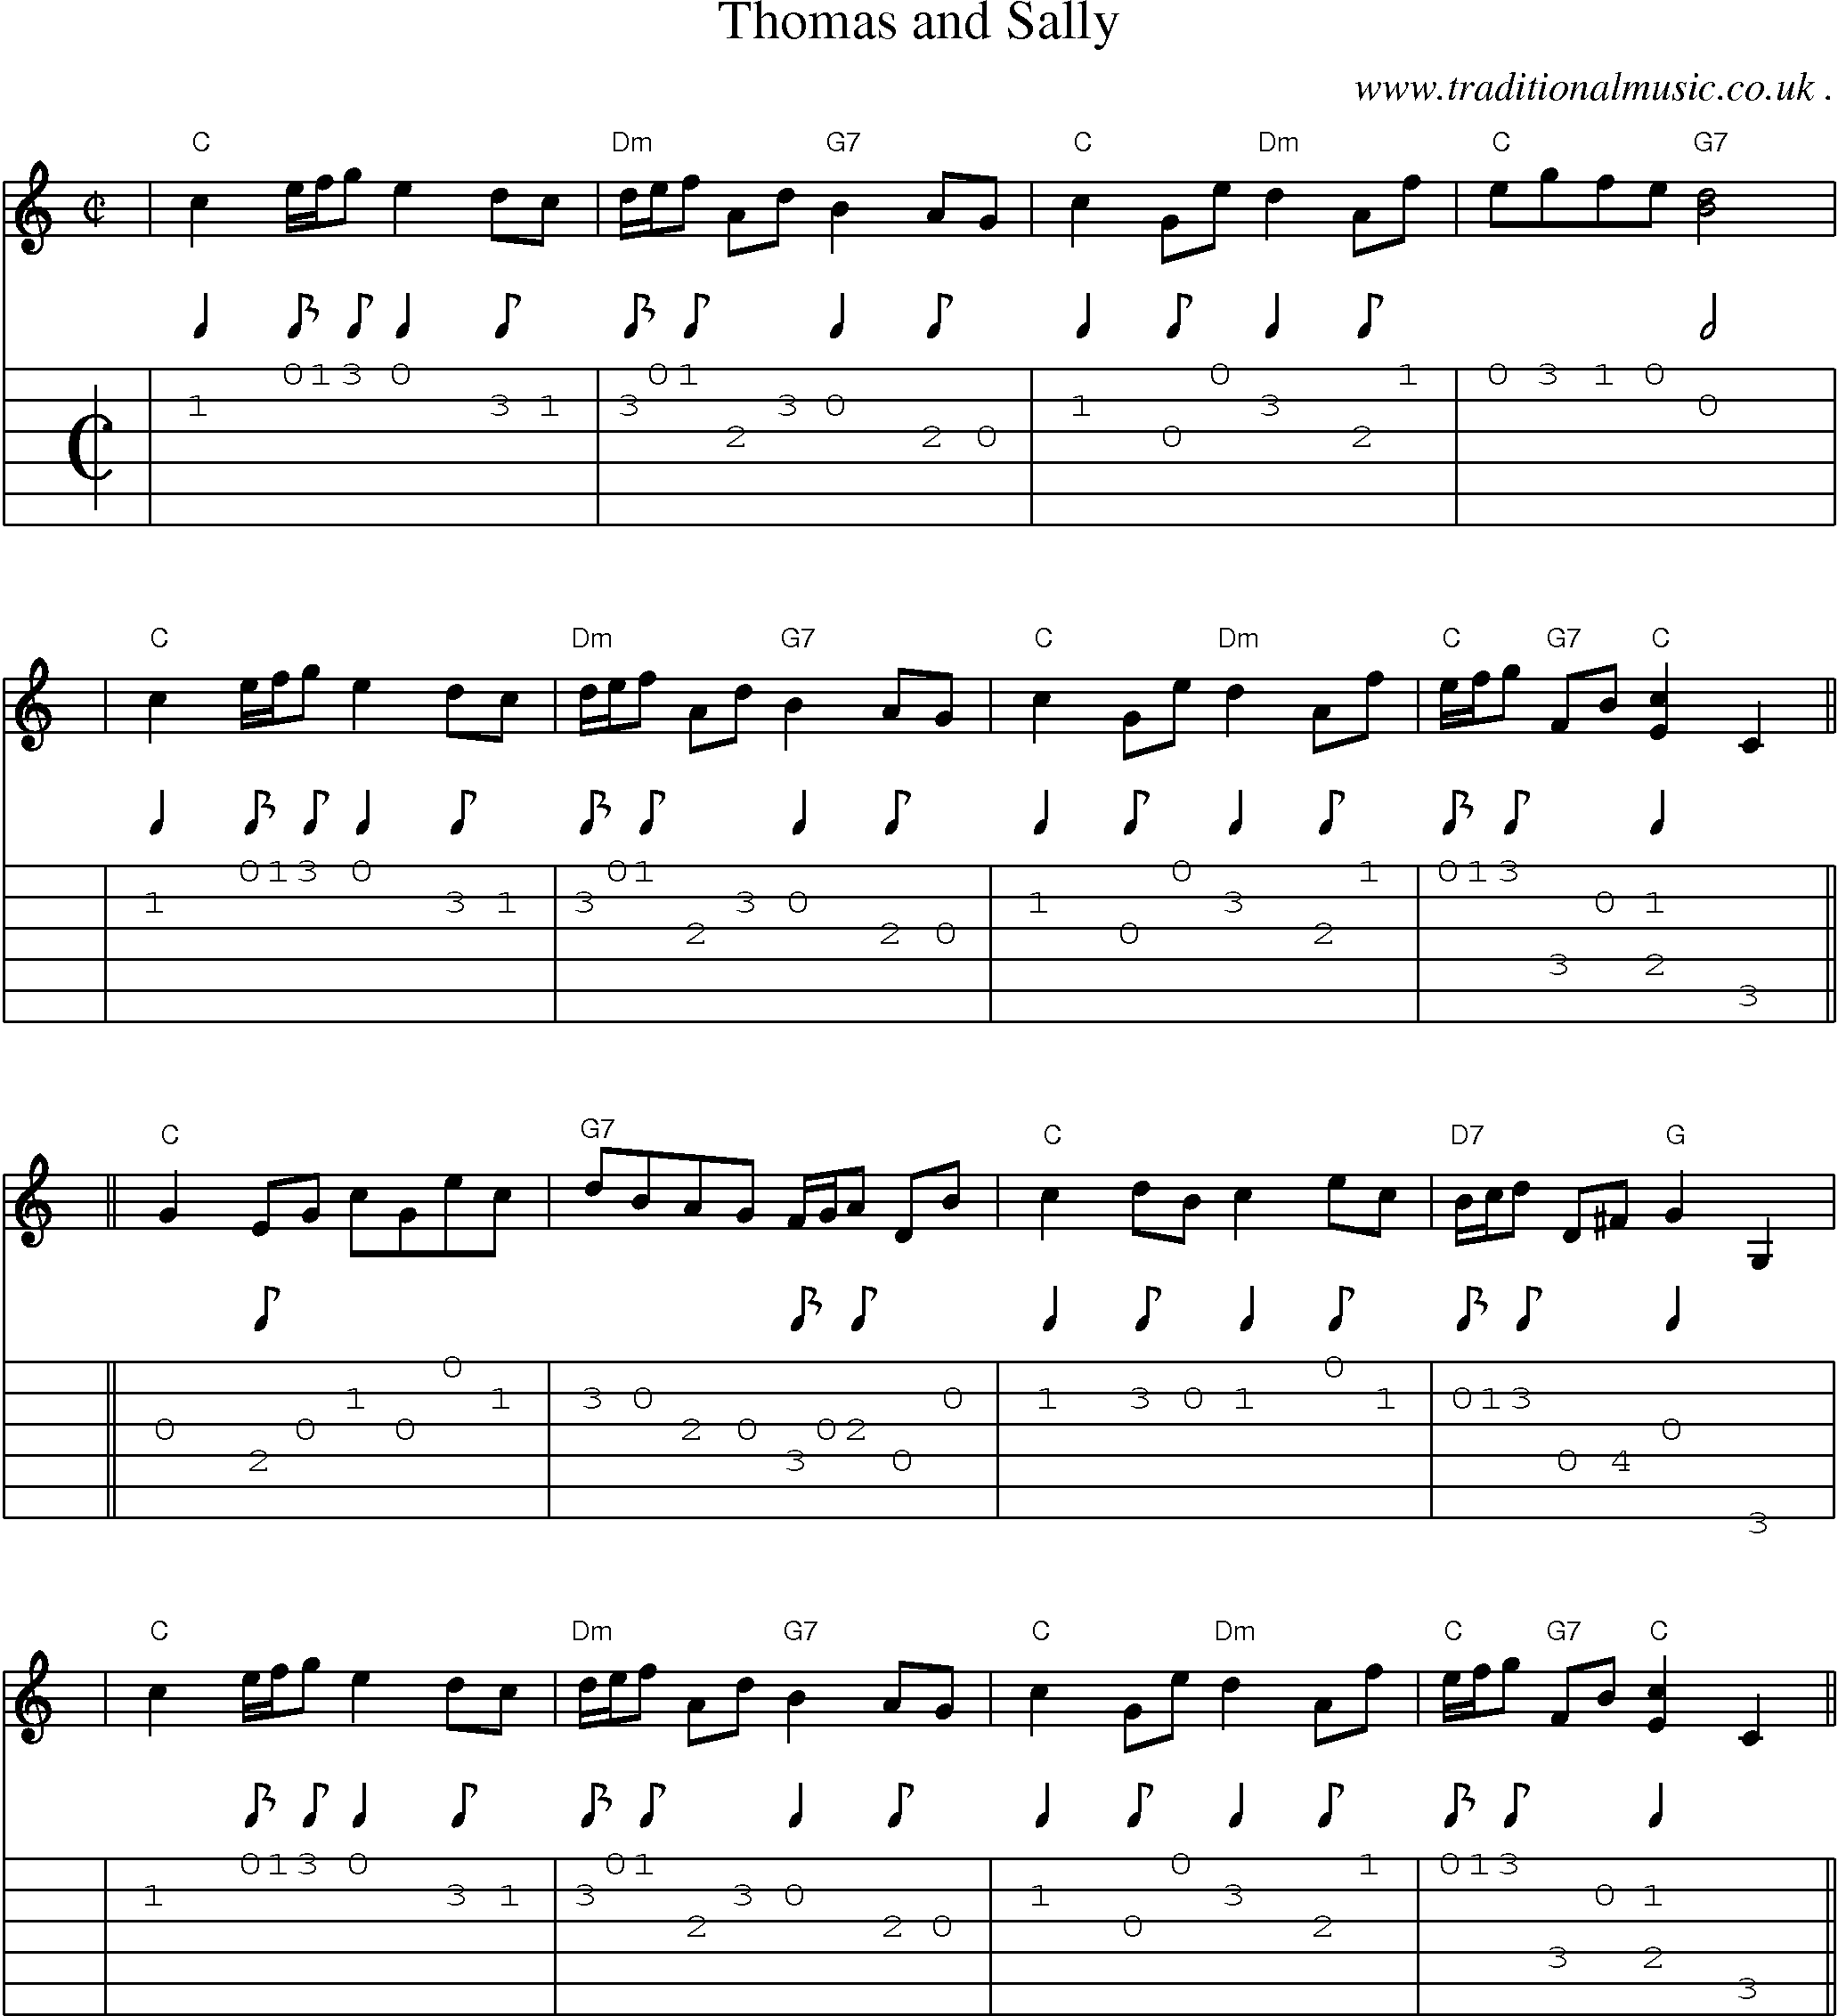 Sheet-music  score, Chords and Guitar Tabs for Thomas And Sally